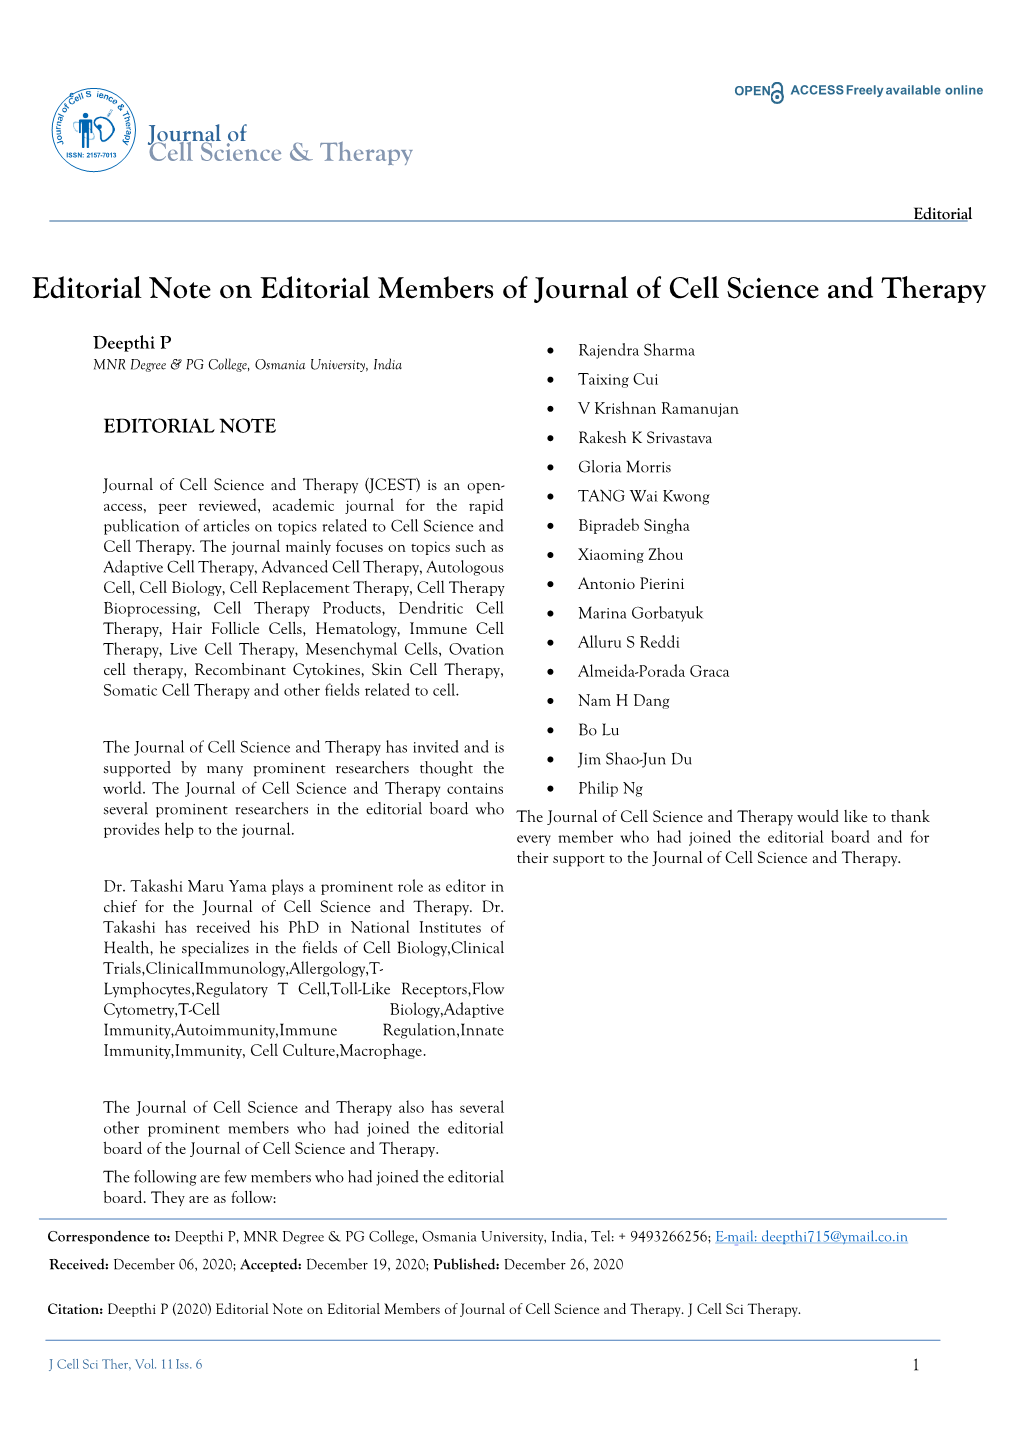 Editorial Note on Editorial Members of Journal of Cell Science and Therapy